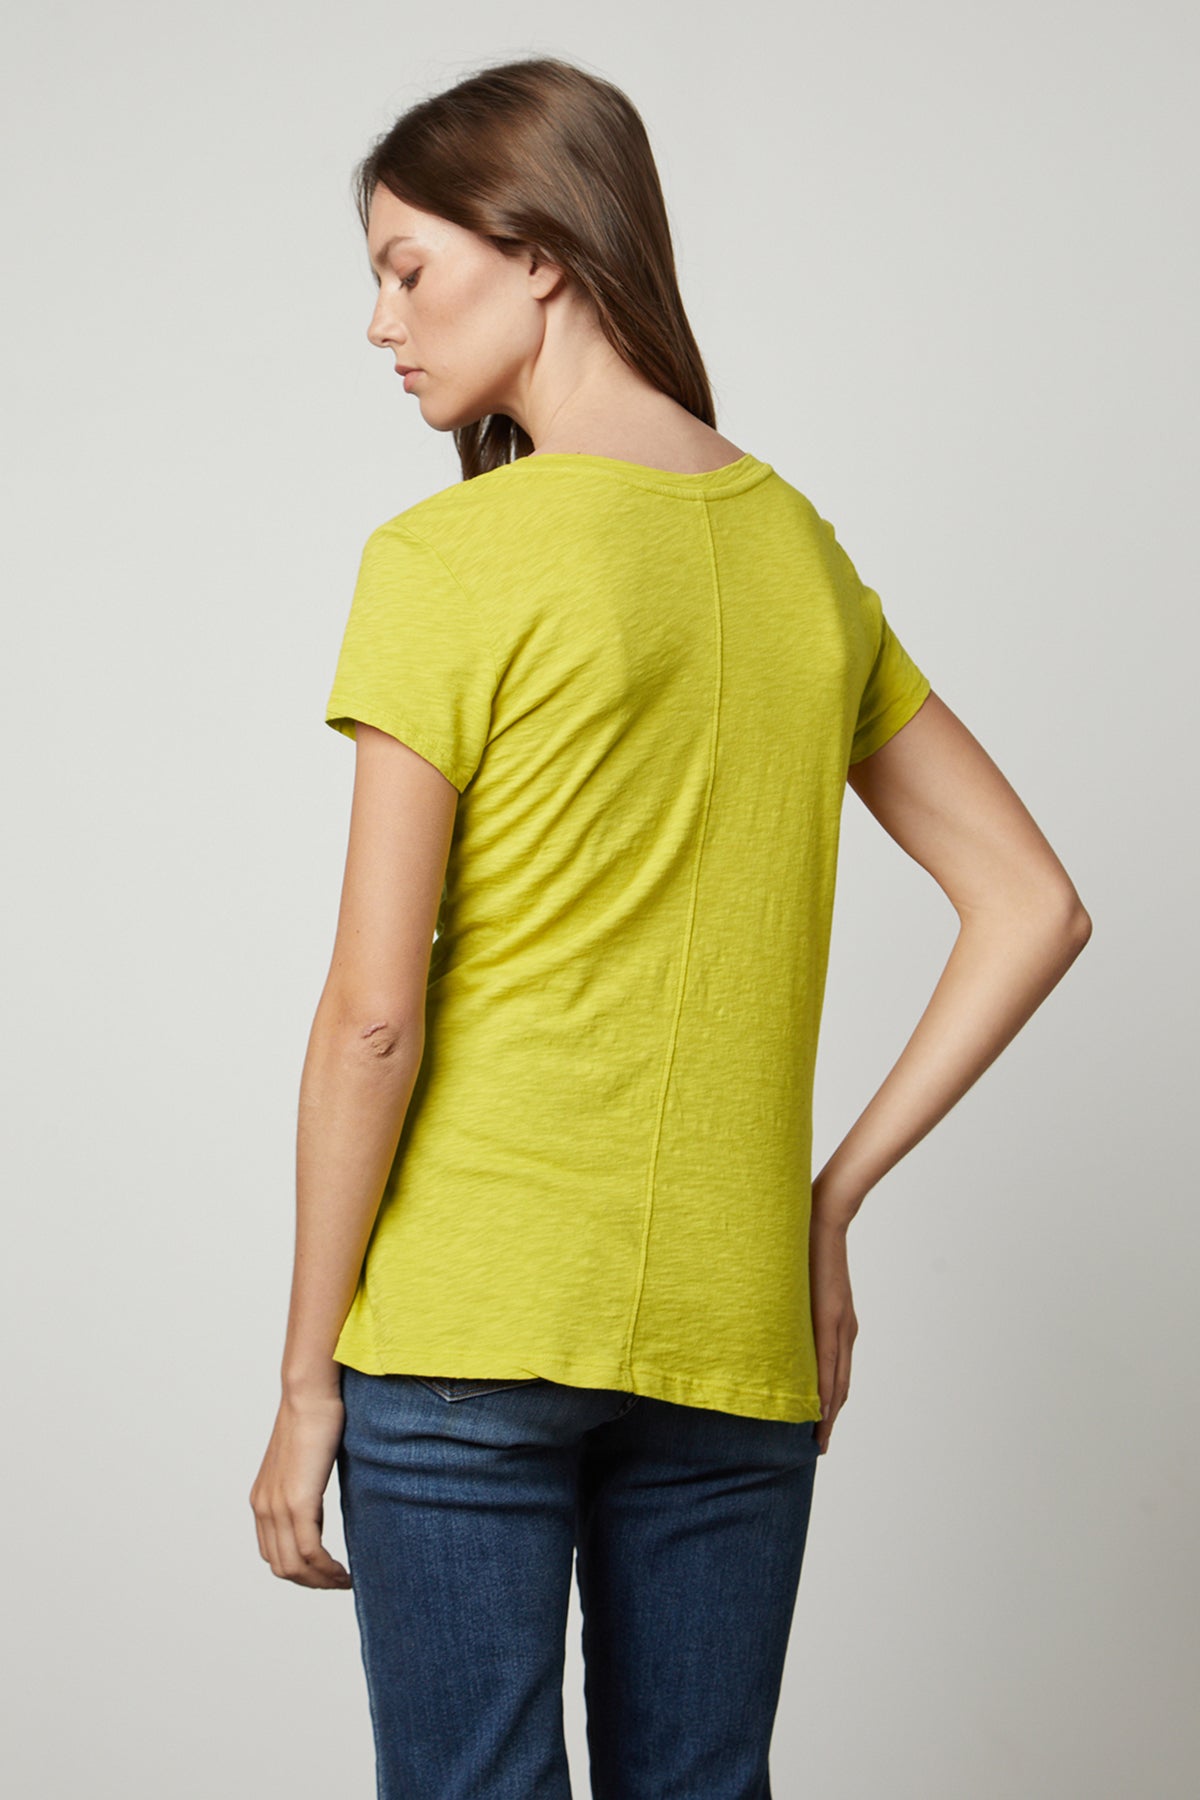   the back view of a woman wearing a Velvet by Graham & Spencer ODELIA COTTON SLUB CREW NECK TEE. 